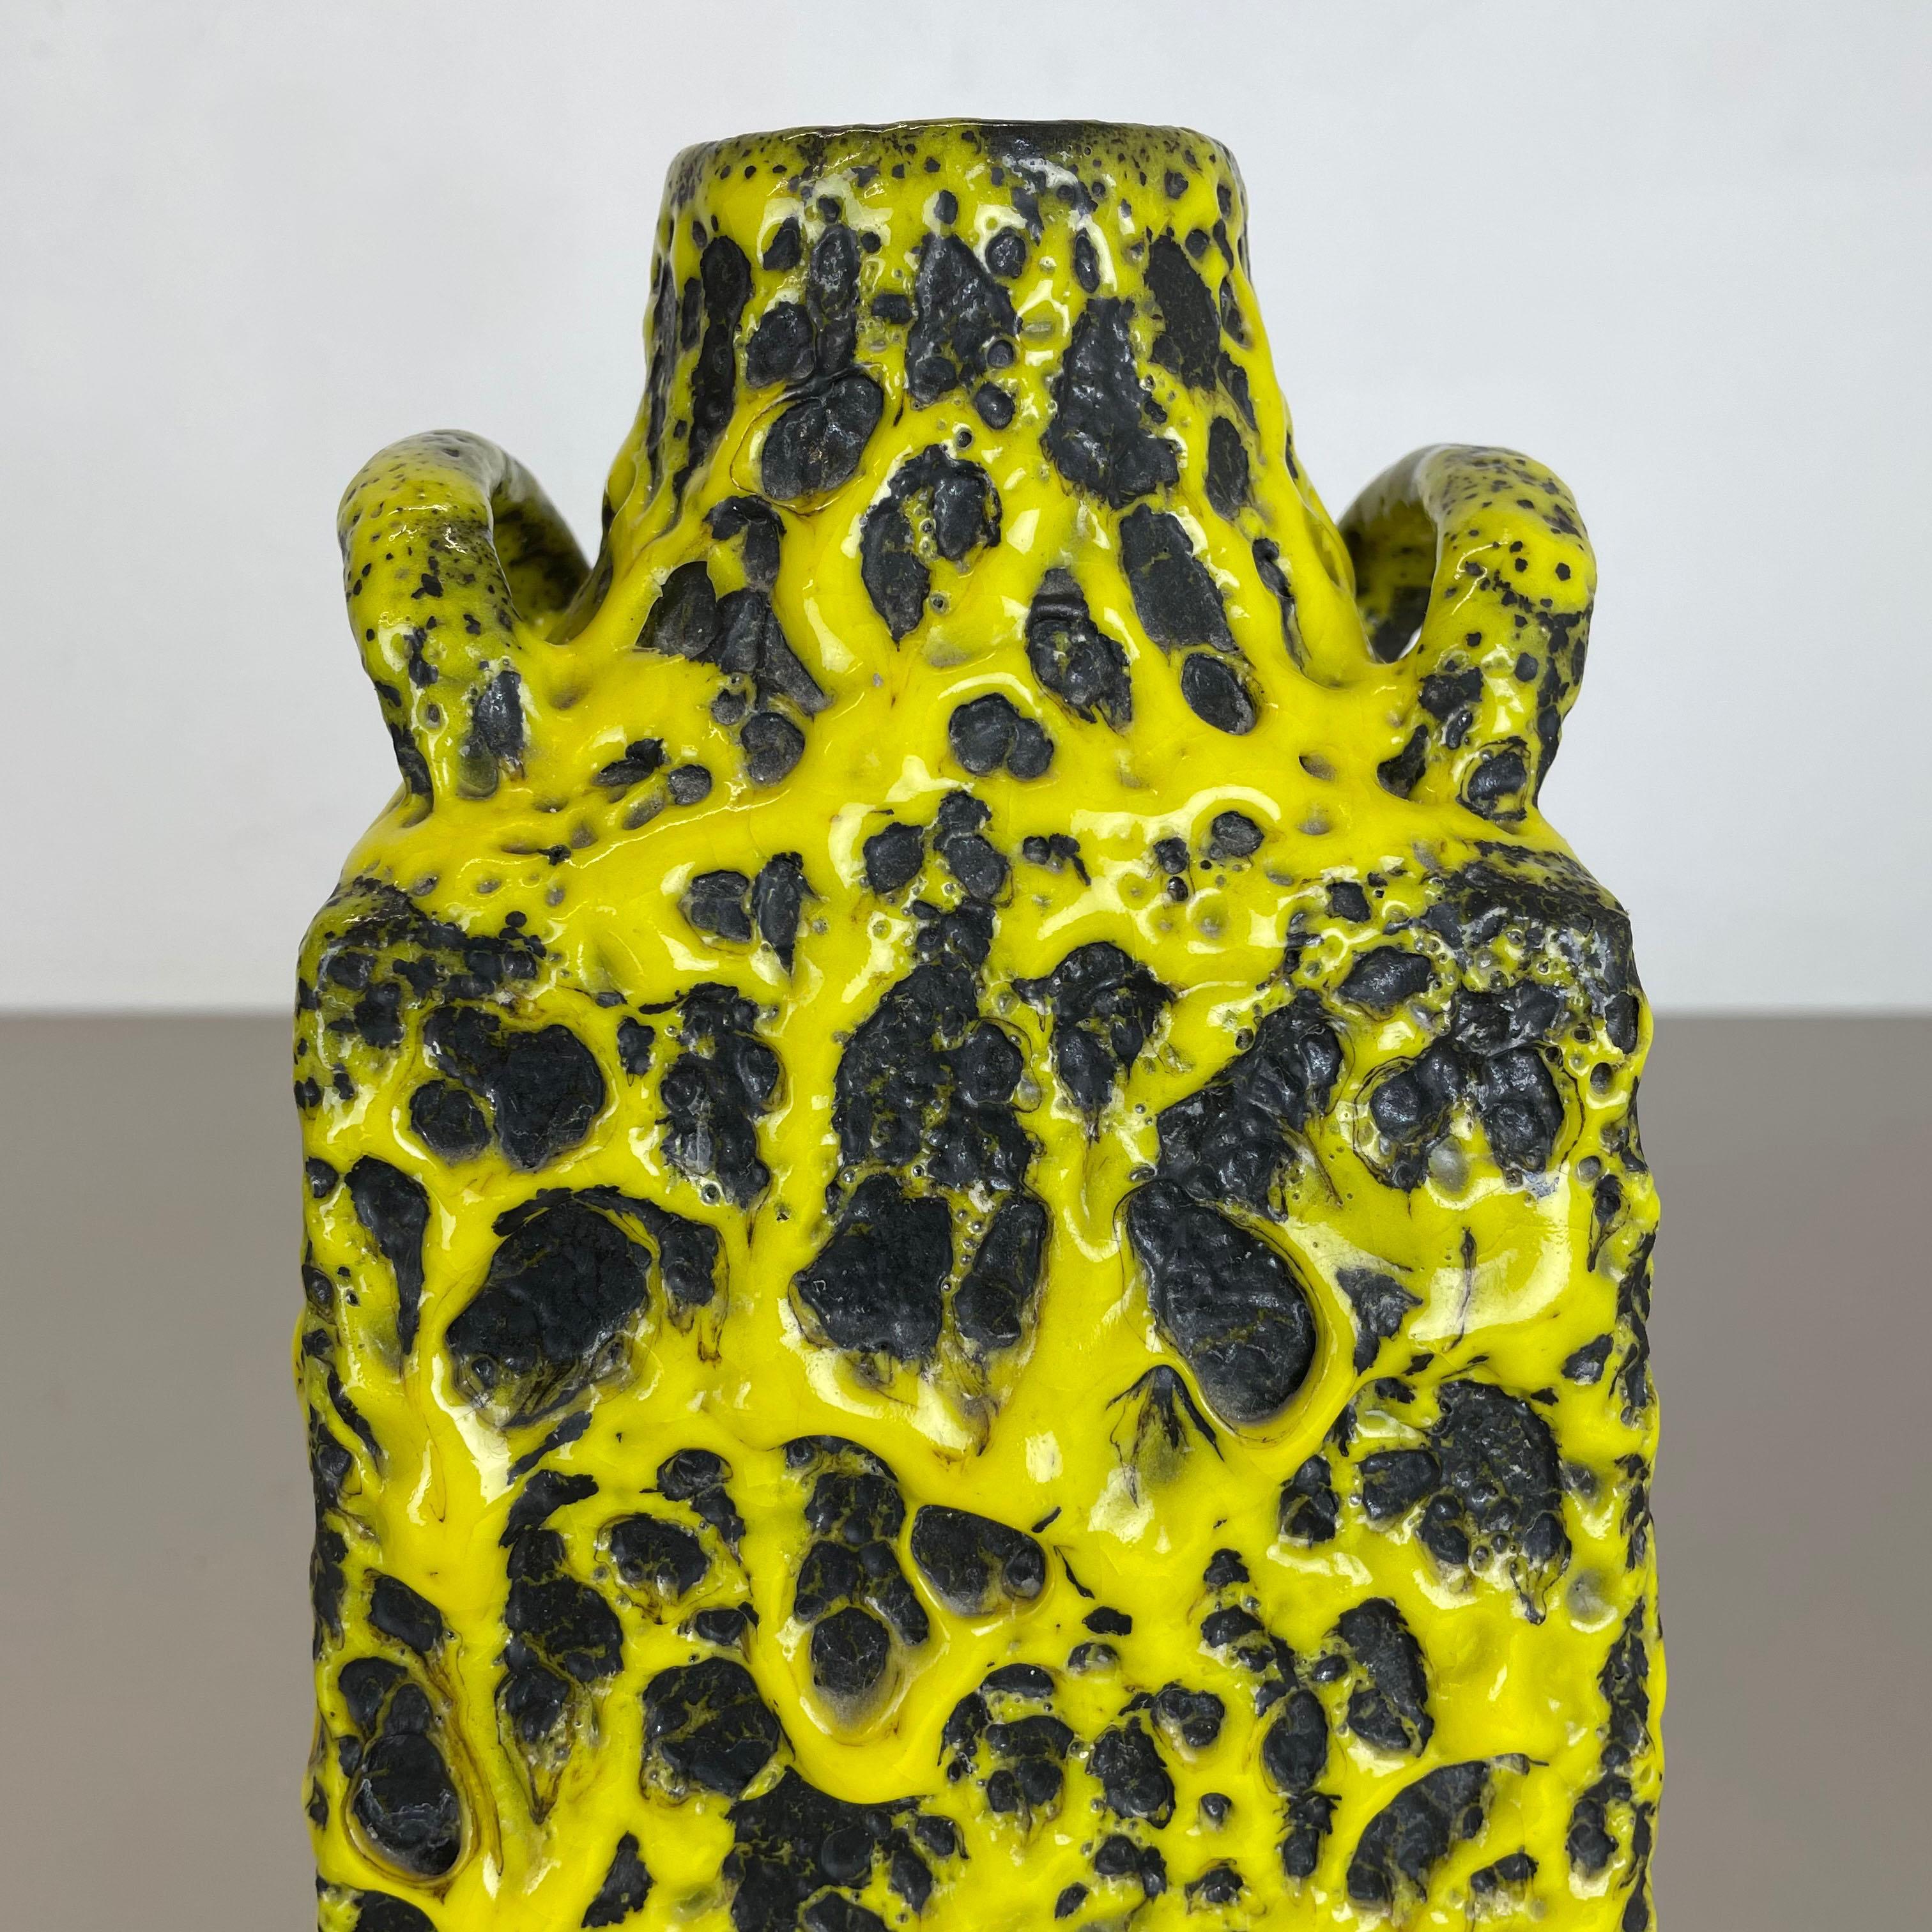 Extraordinary Vintage Pottery Fat Lava Vase Made by Es Keramik, Germany, 1960s For Sale 3